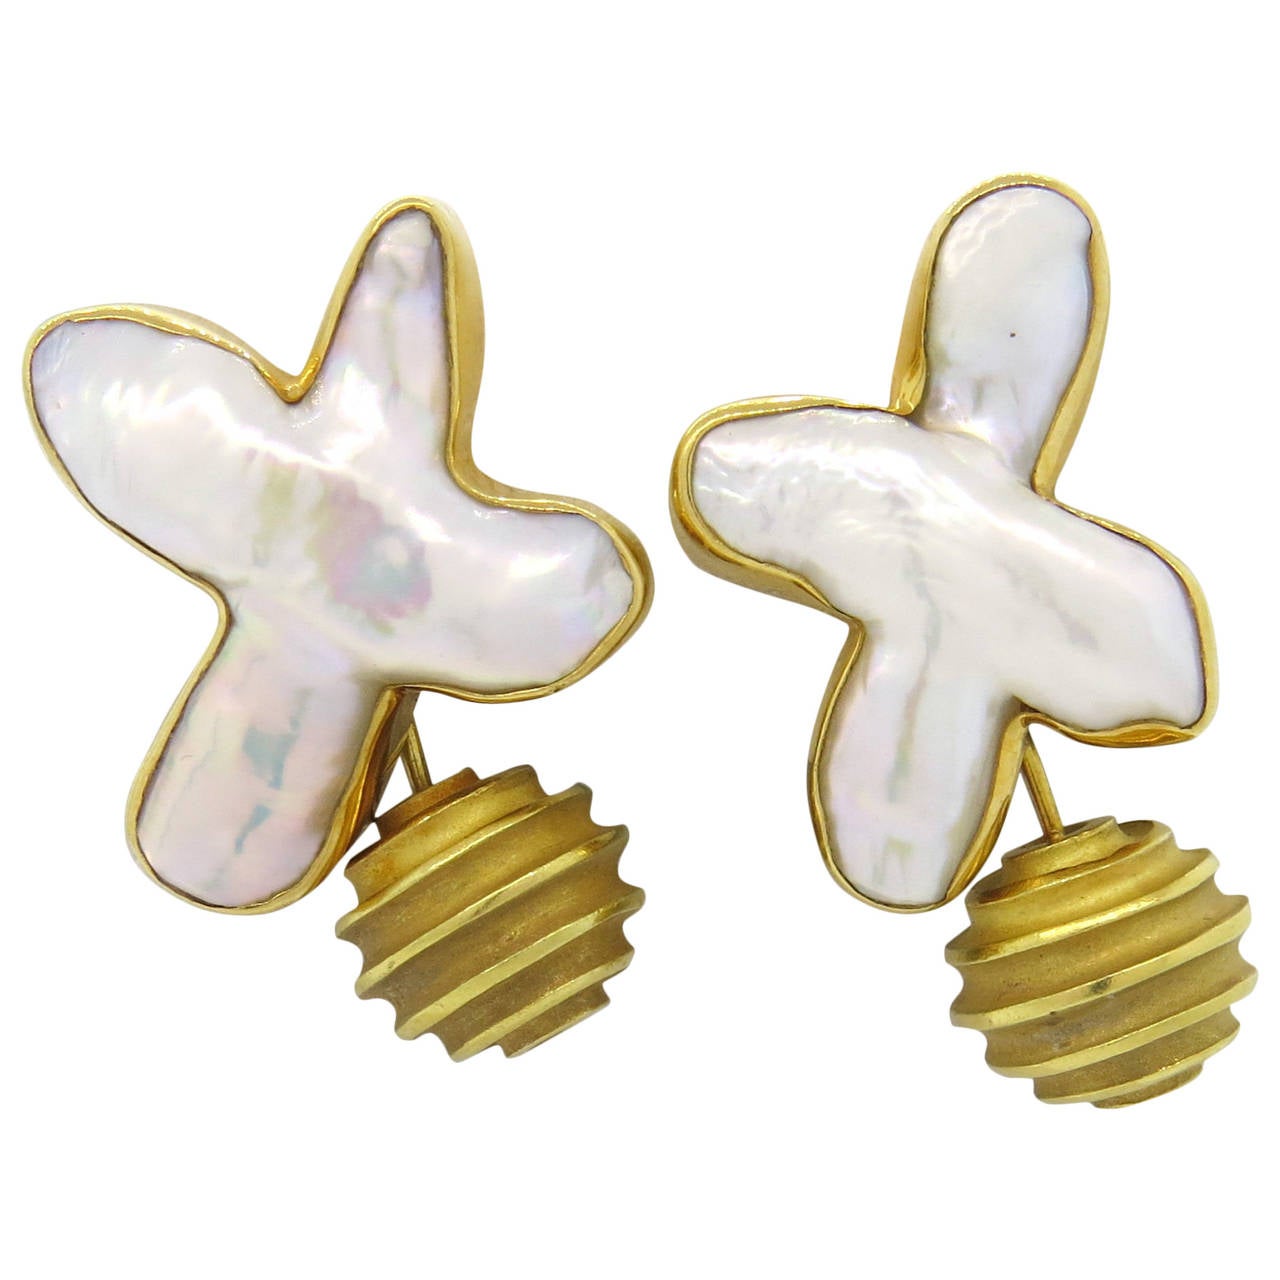 A pair of 18k gold earrings set with Biwa pearls.with removal gold drops.  Crafted by Christopher Walling, the earrings measure 31mm x 25mm (without the drops), and the drops are 13.8mm in diameter.  The weight of the earrings is 31.2 grams